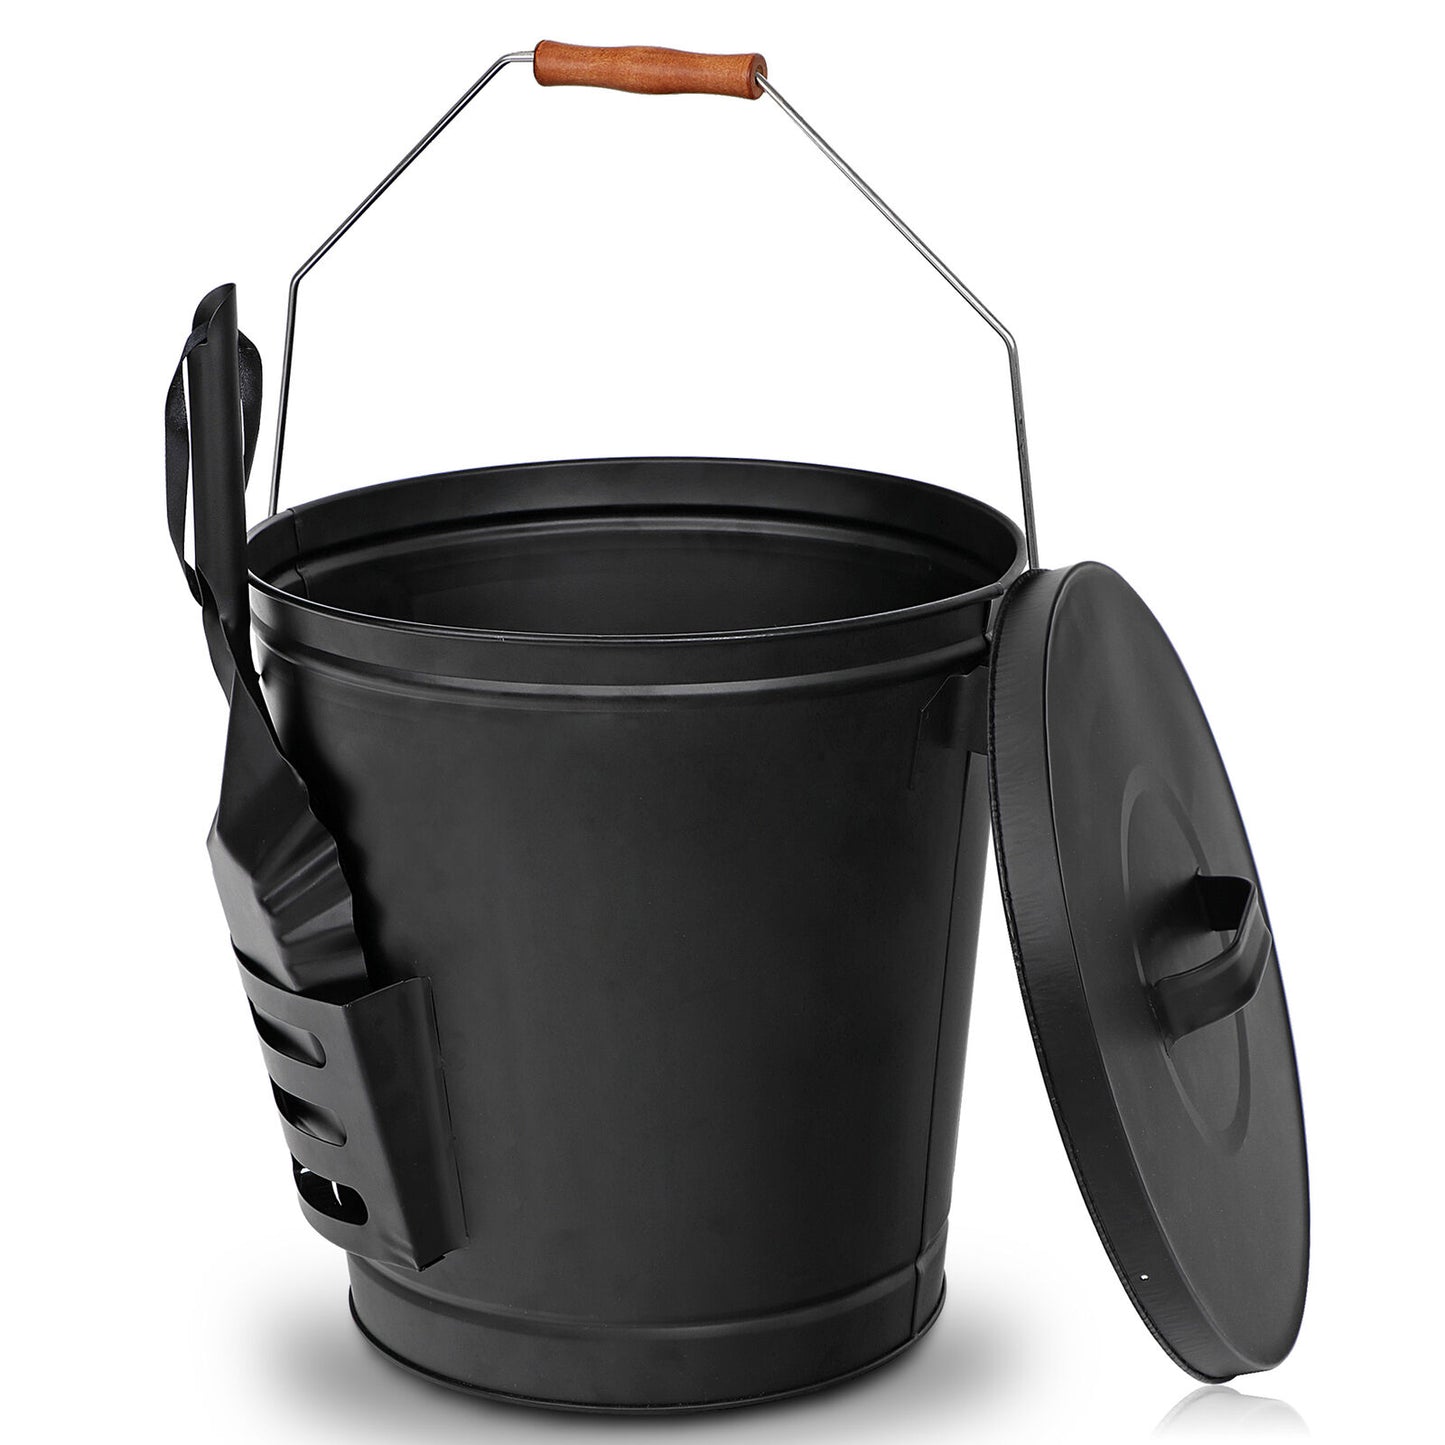 Black Metal Fireplace Ash Bucket With Shovel Lid Cover Fire Pits Stove Sturdy